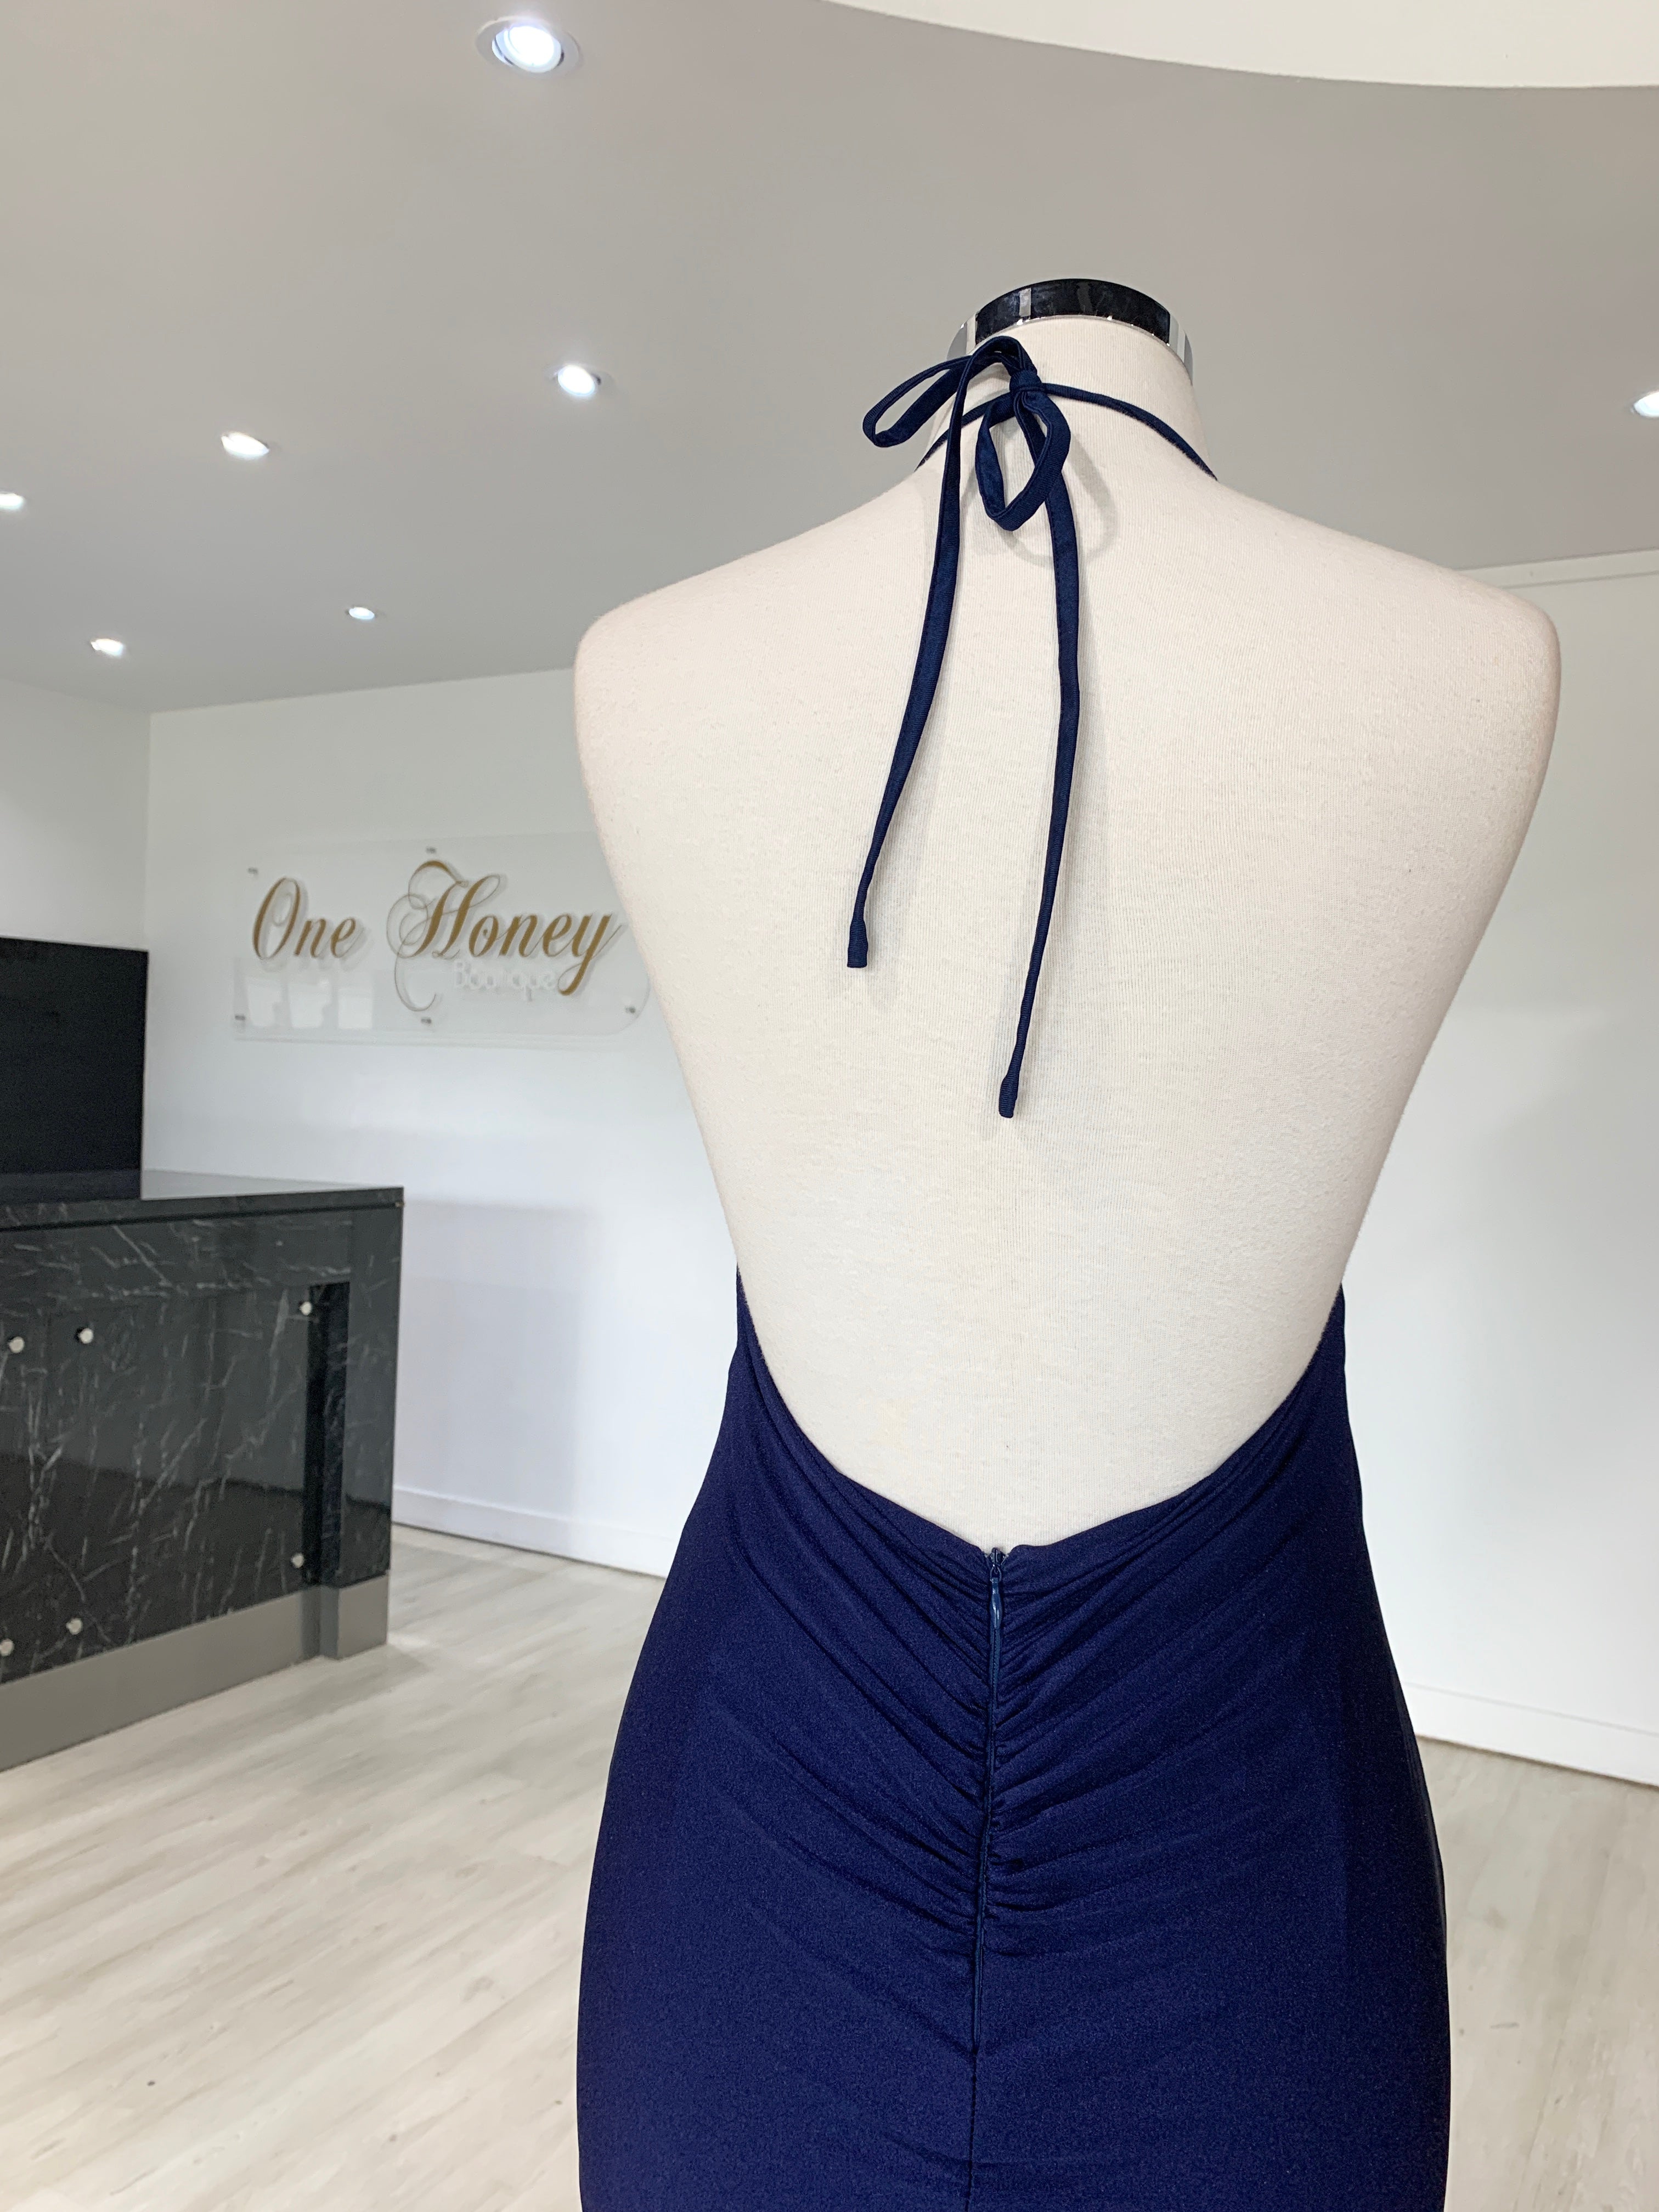 Honey Couture ARIANA Navy Blue Low Back Mermaid Evening Gown Dress {vendor} AfterPay Humm ZipPay LayBuy Sezzle